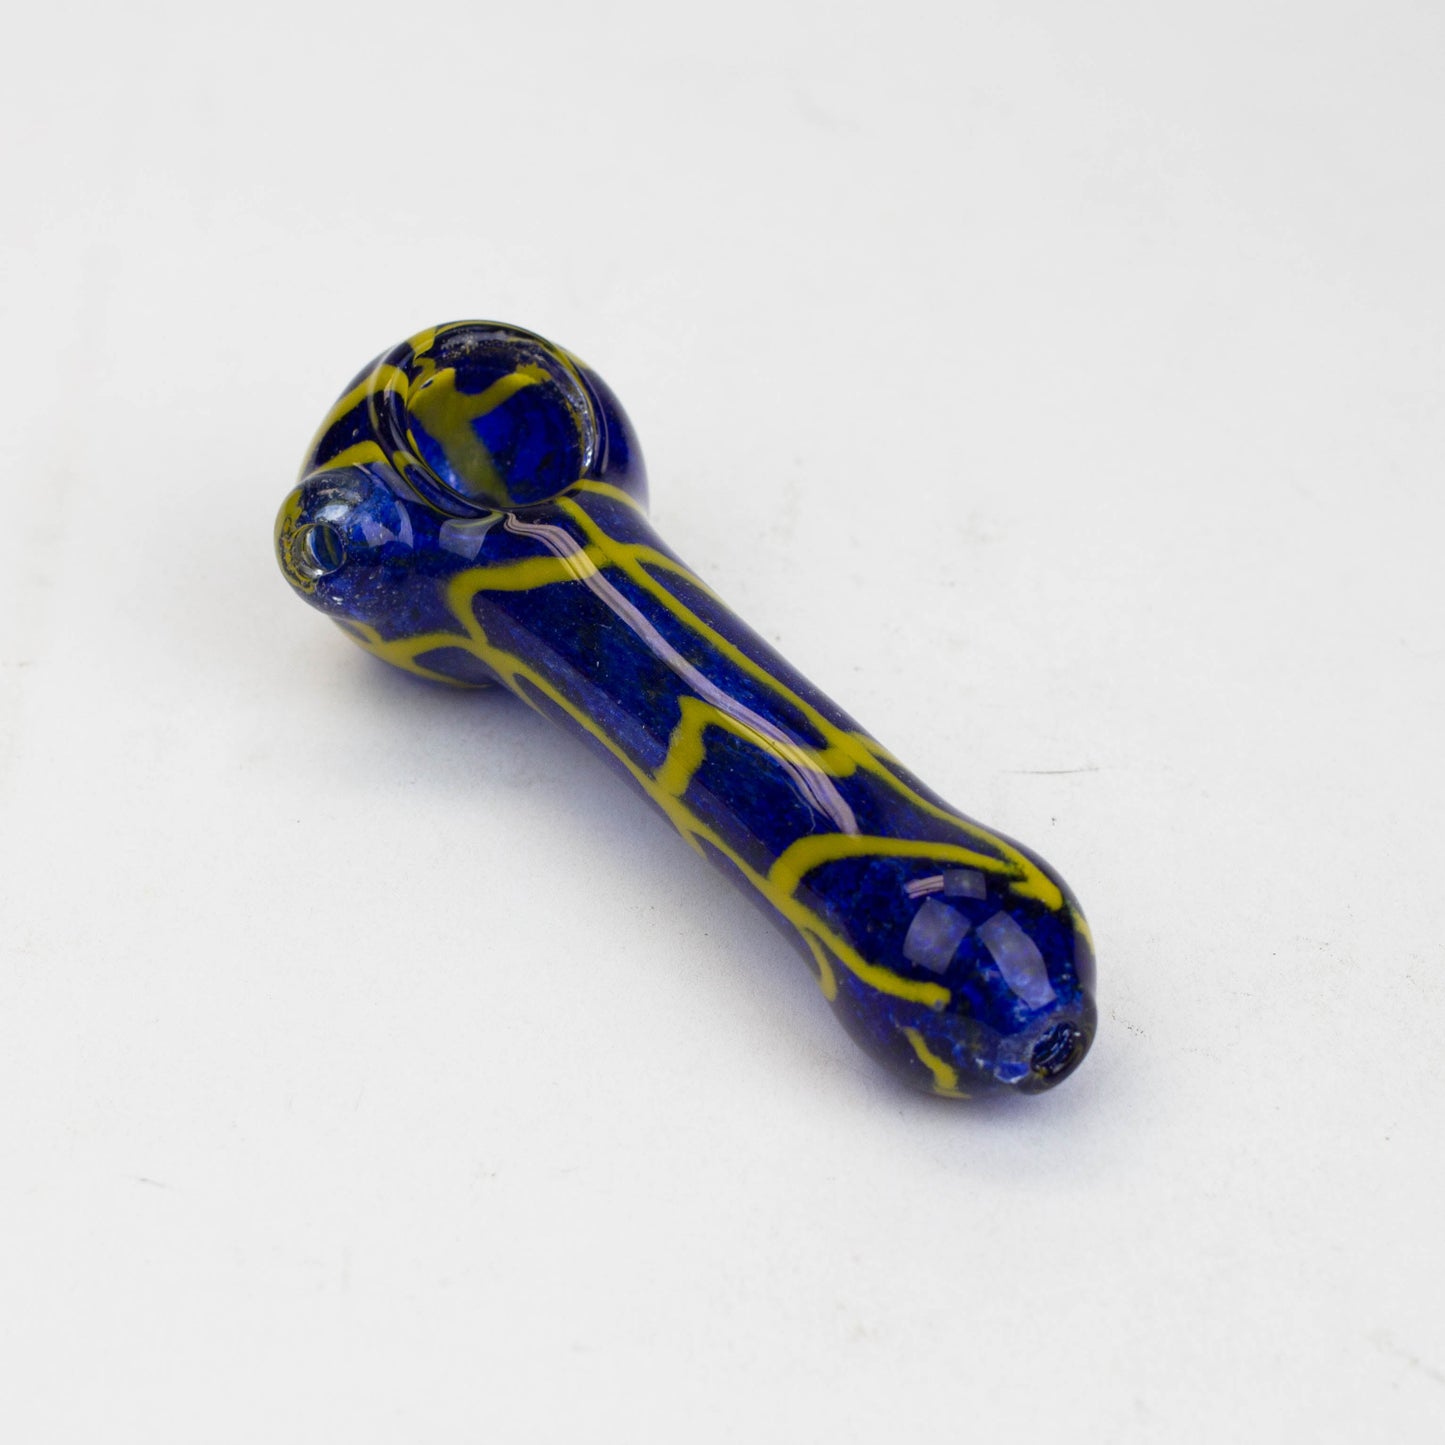 5" soft glass hand pipe [8983]_2